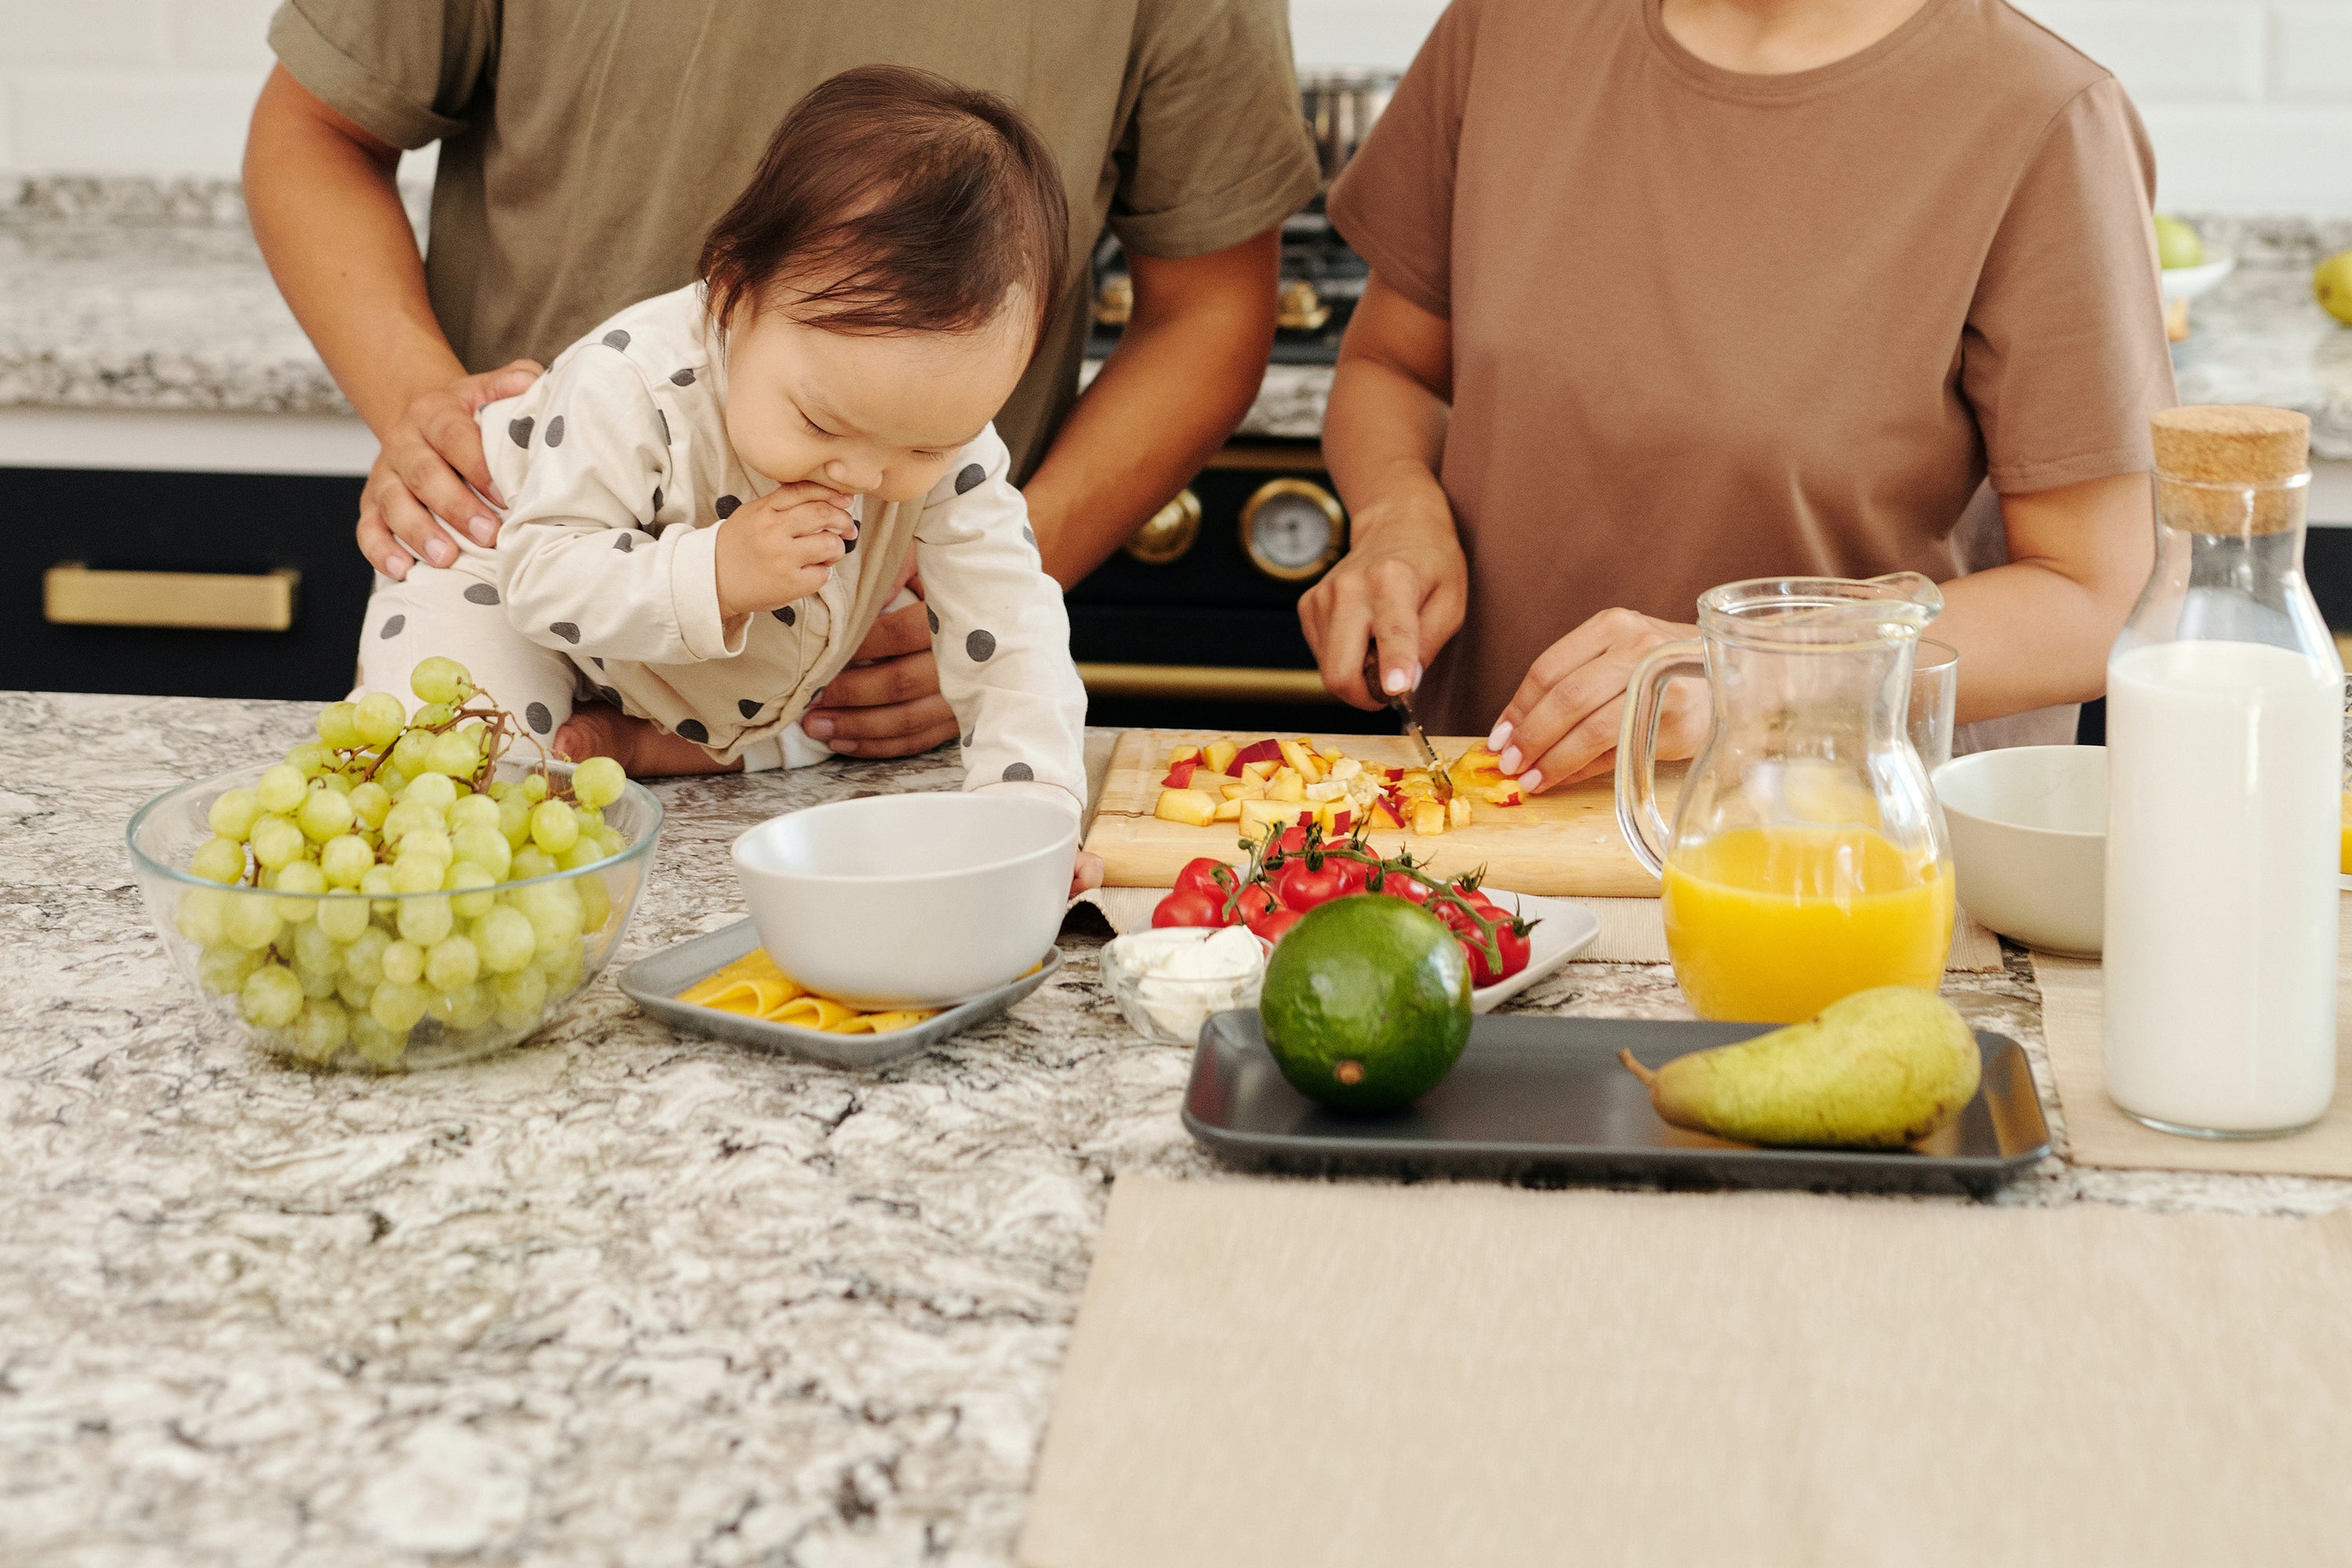 Top 10 Foods for Your Newborn's Culinary Adventure